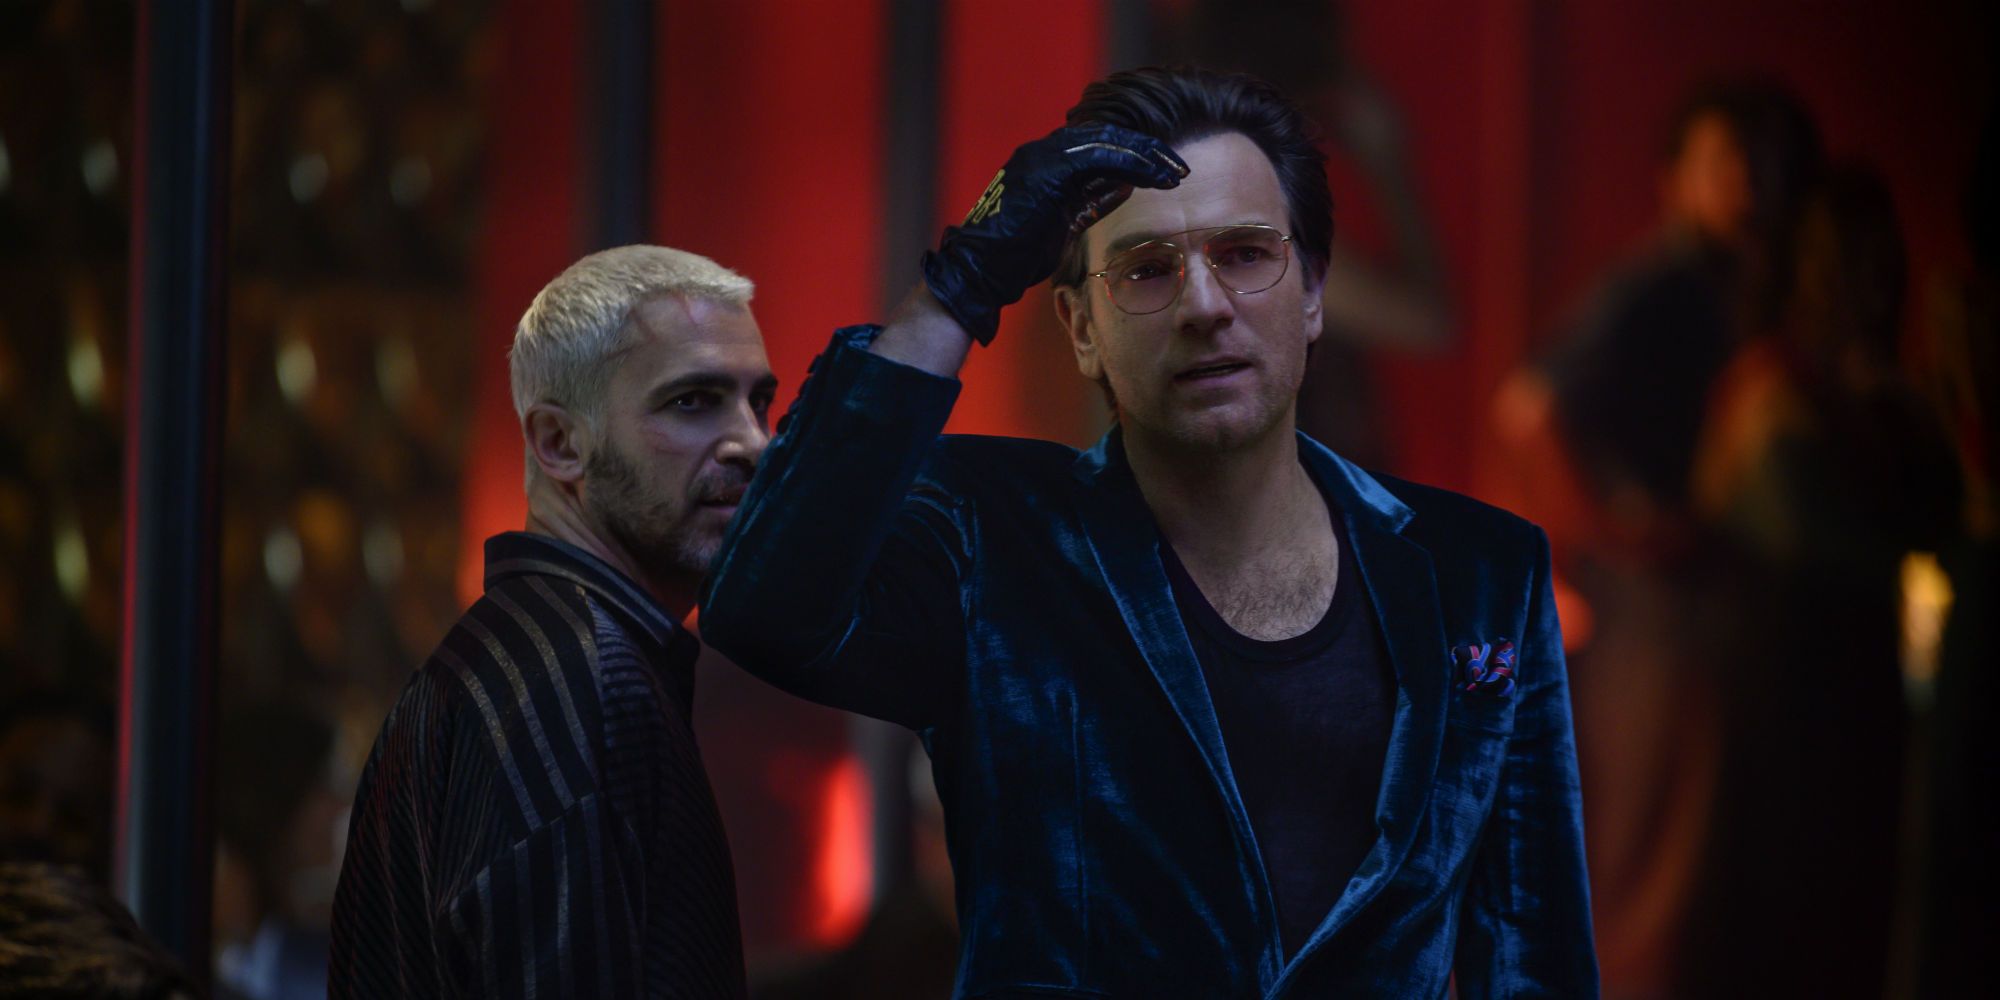 Chris Messina and Ewan McGregor in Birds of Prey (And the Fantabulous Emancipation of One Harley Quinn)